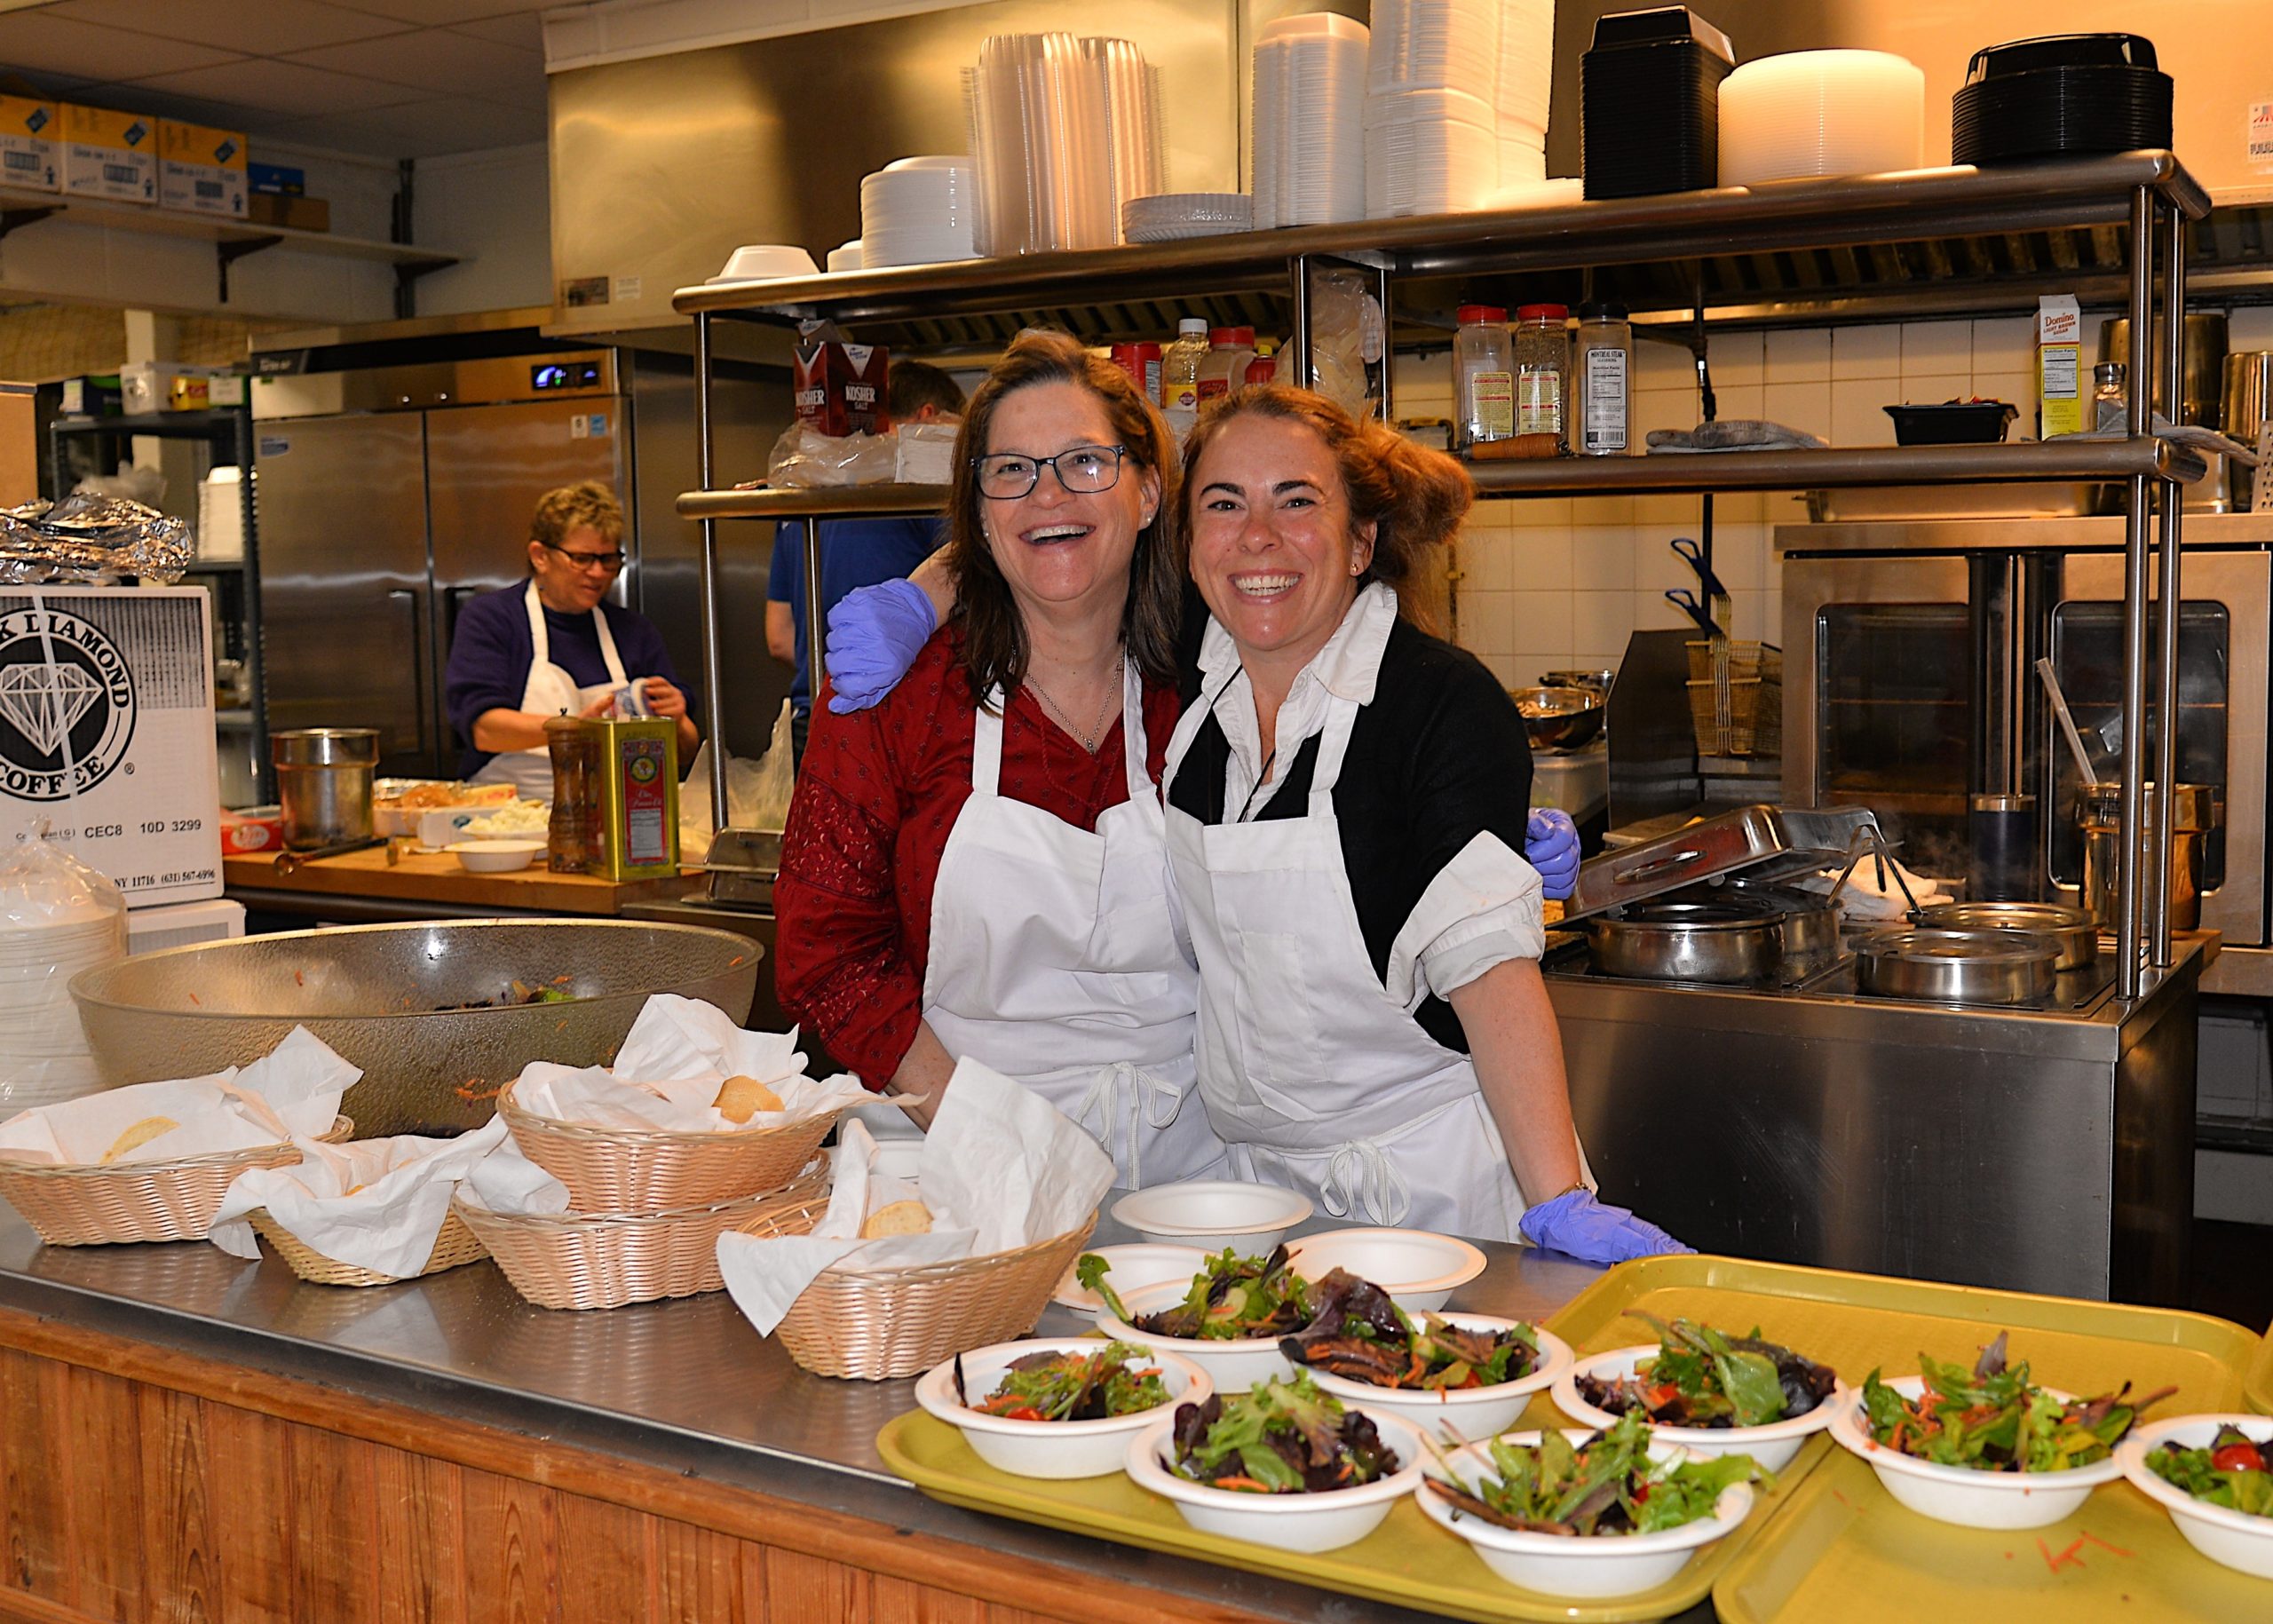 A pasta dinner fundraiser took place at the Montauk firehouse on Saturday to benefit the Robert R. Fisher scholarship fund. Regan Moloney and Shannon Coppola helped out. KYRIL BROMLEY